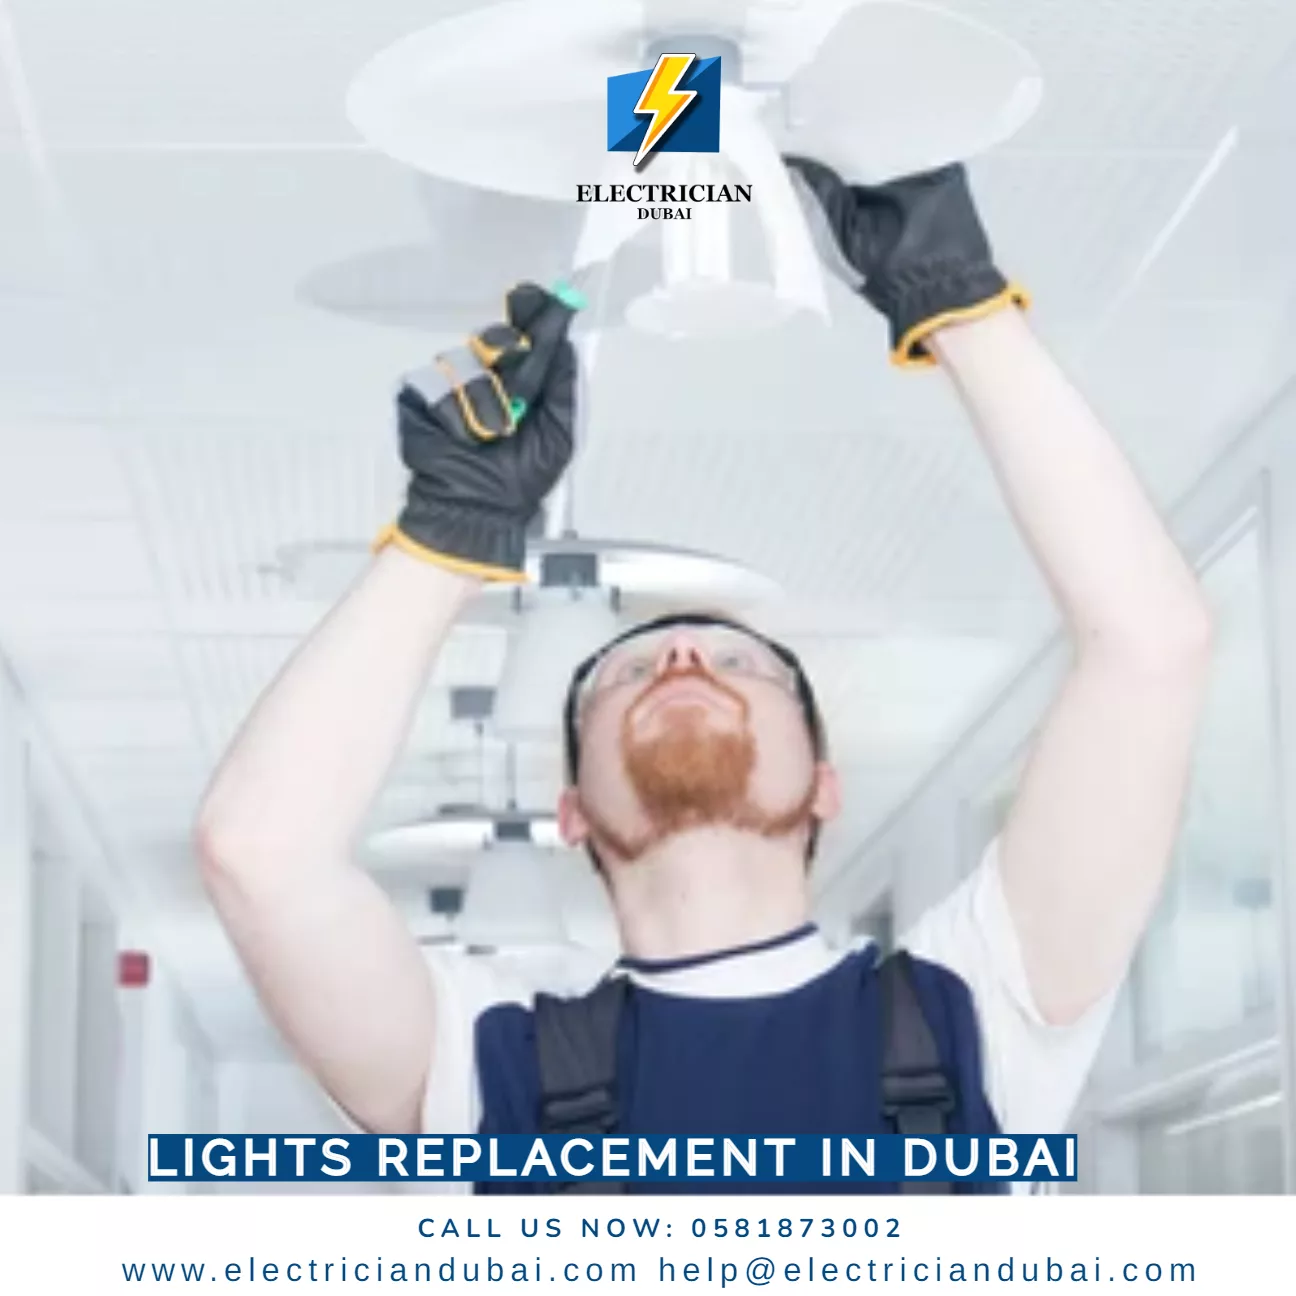 Lights Replacement in Dubai